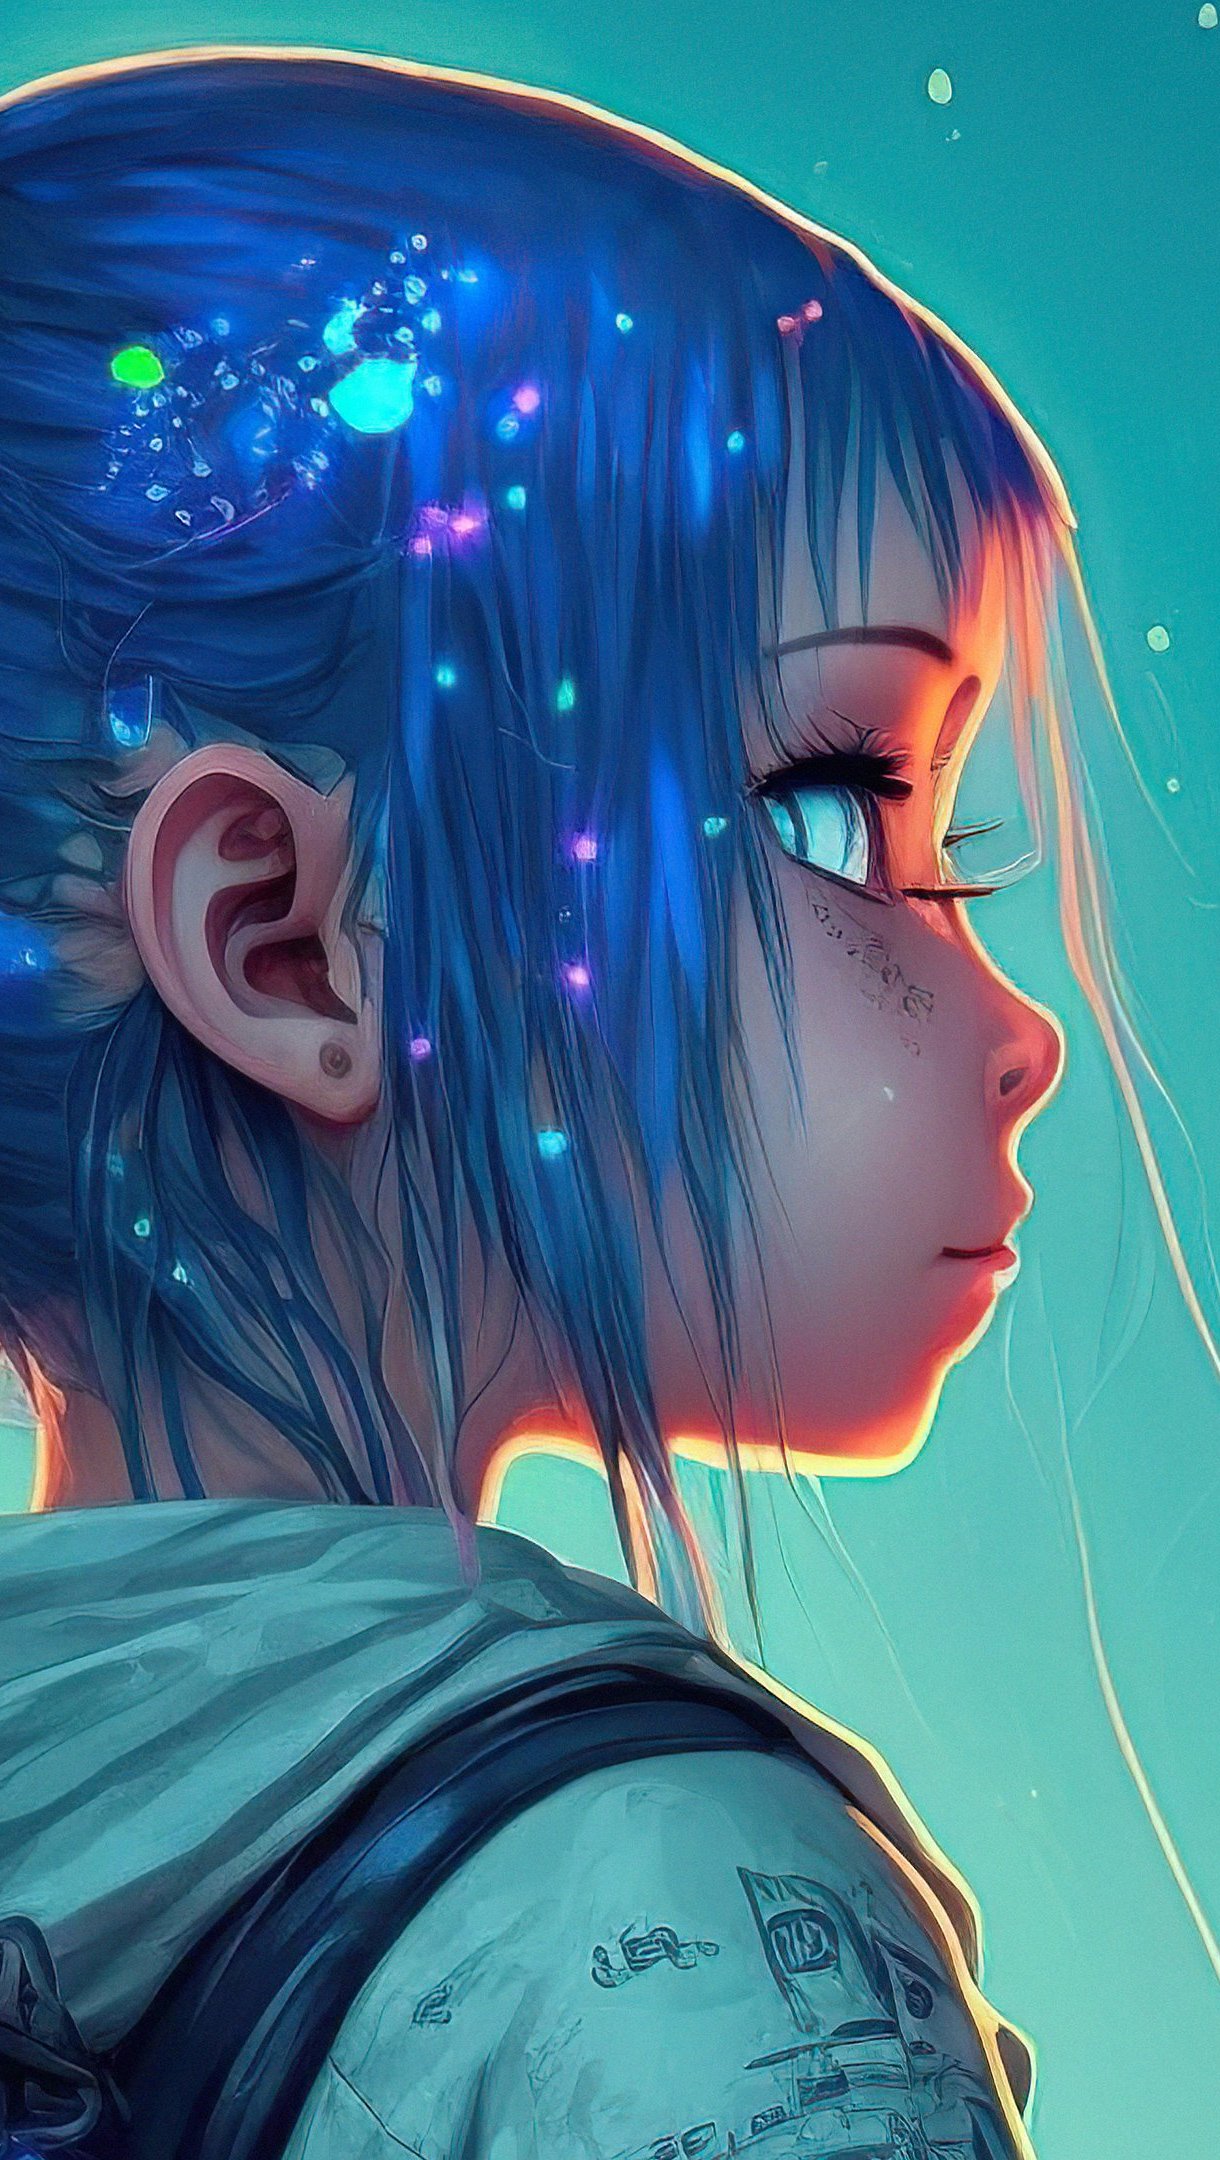 Wallpaper Intuition Girl with blue hair and lights Vertical